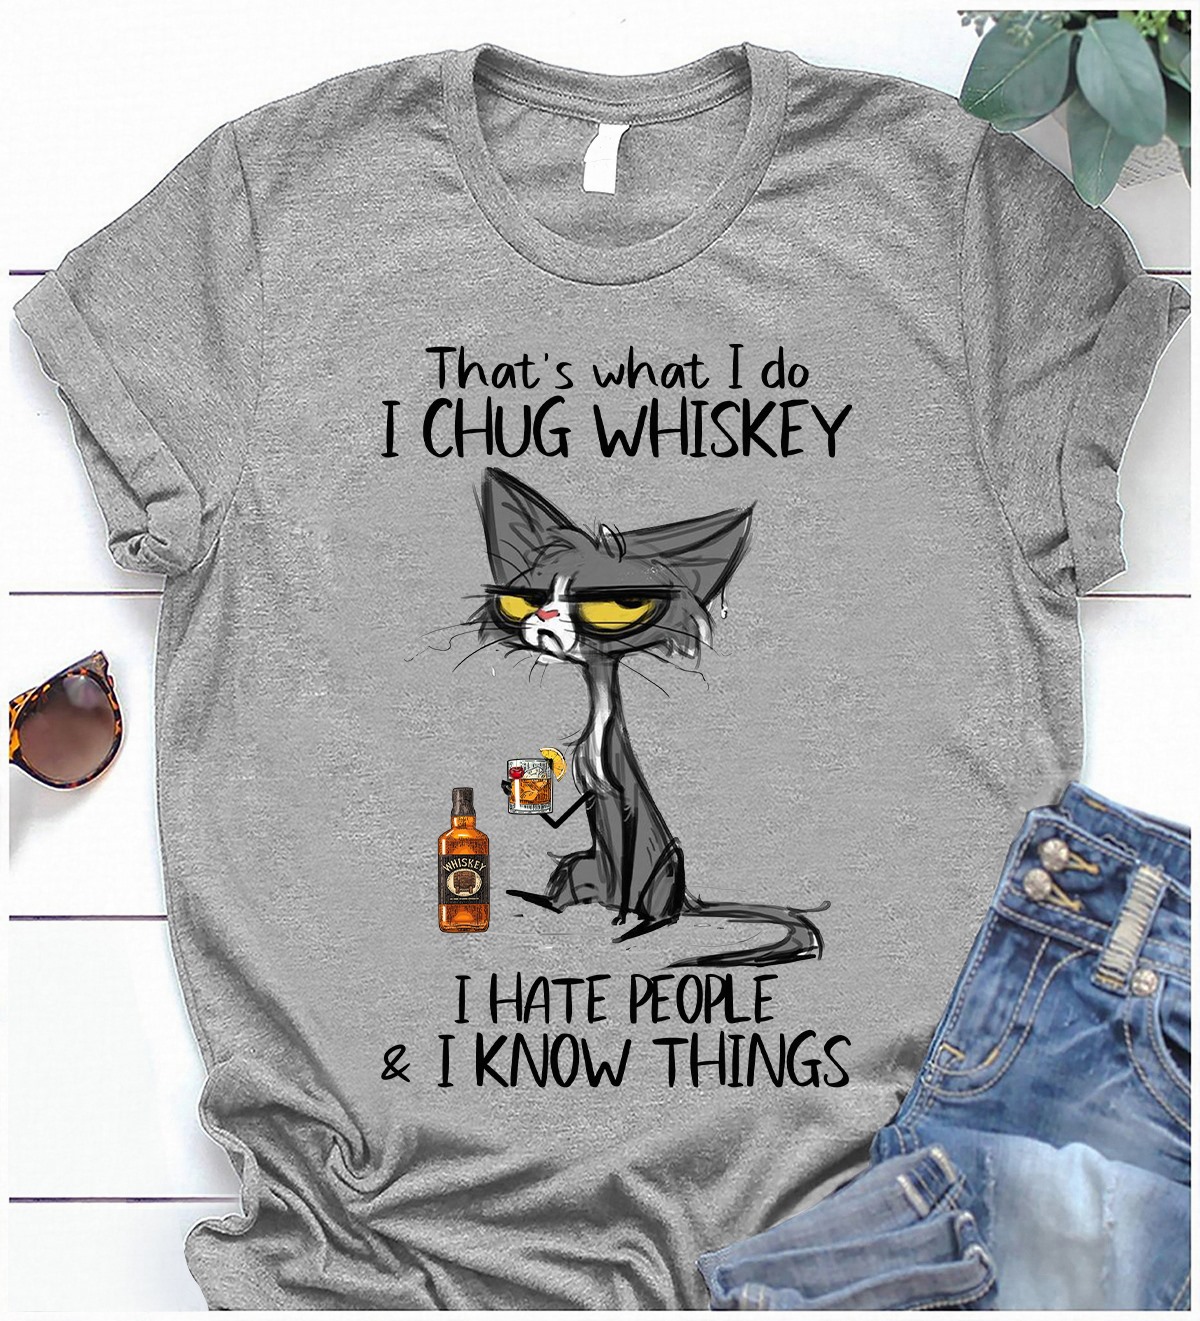 That's what I do I chug whiskey I hate people and I know things - Cat and whiskey wine